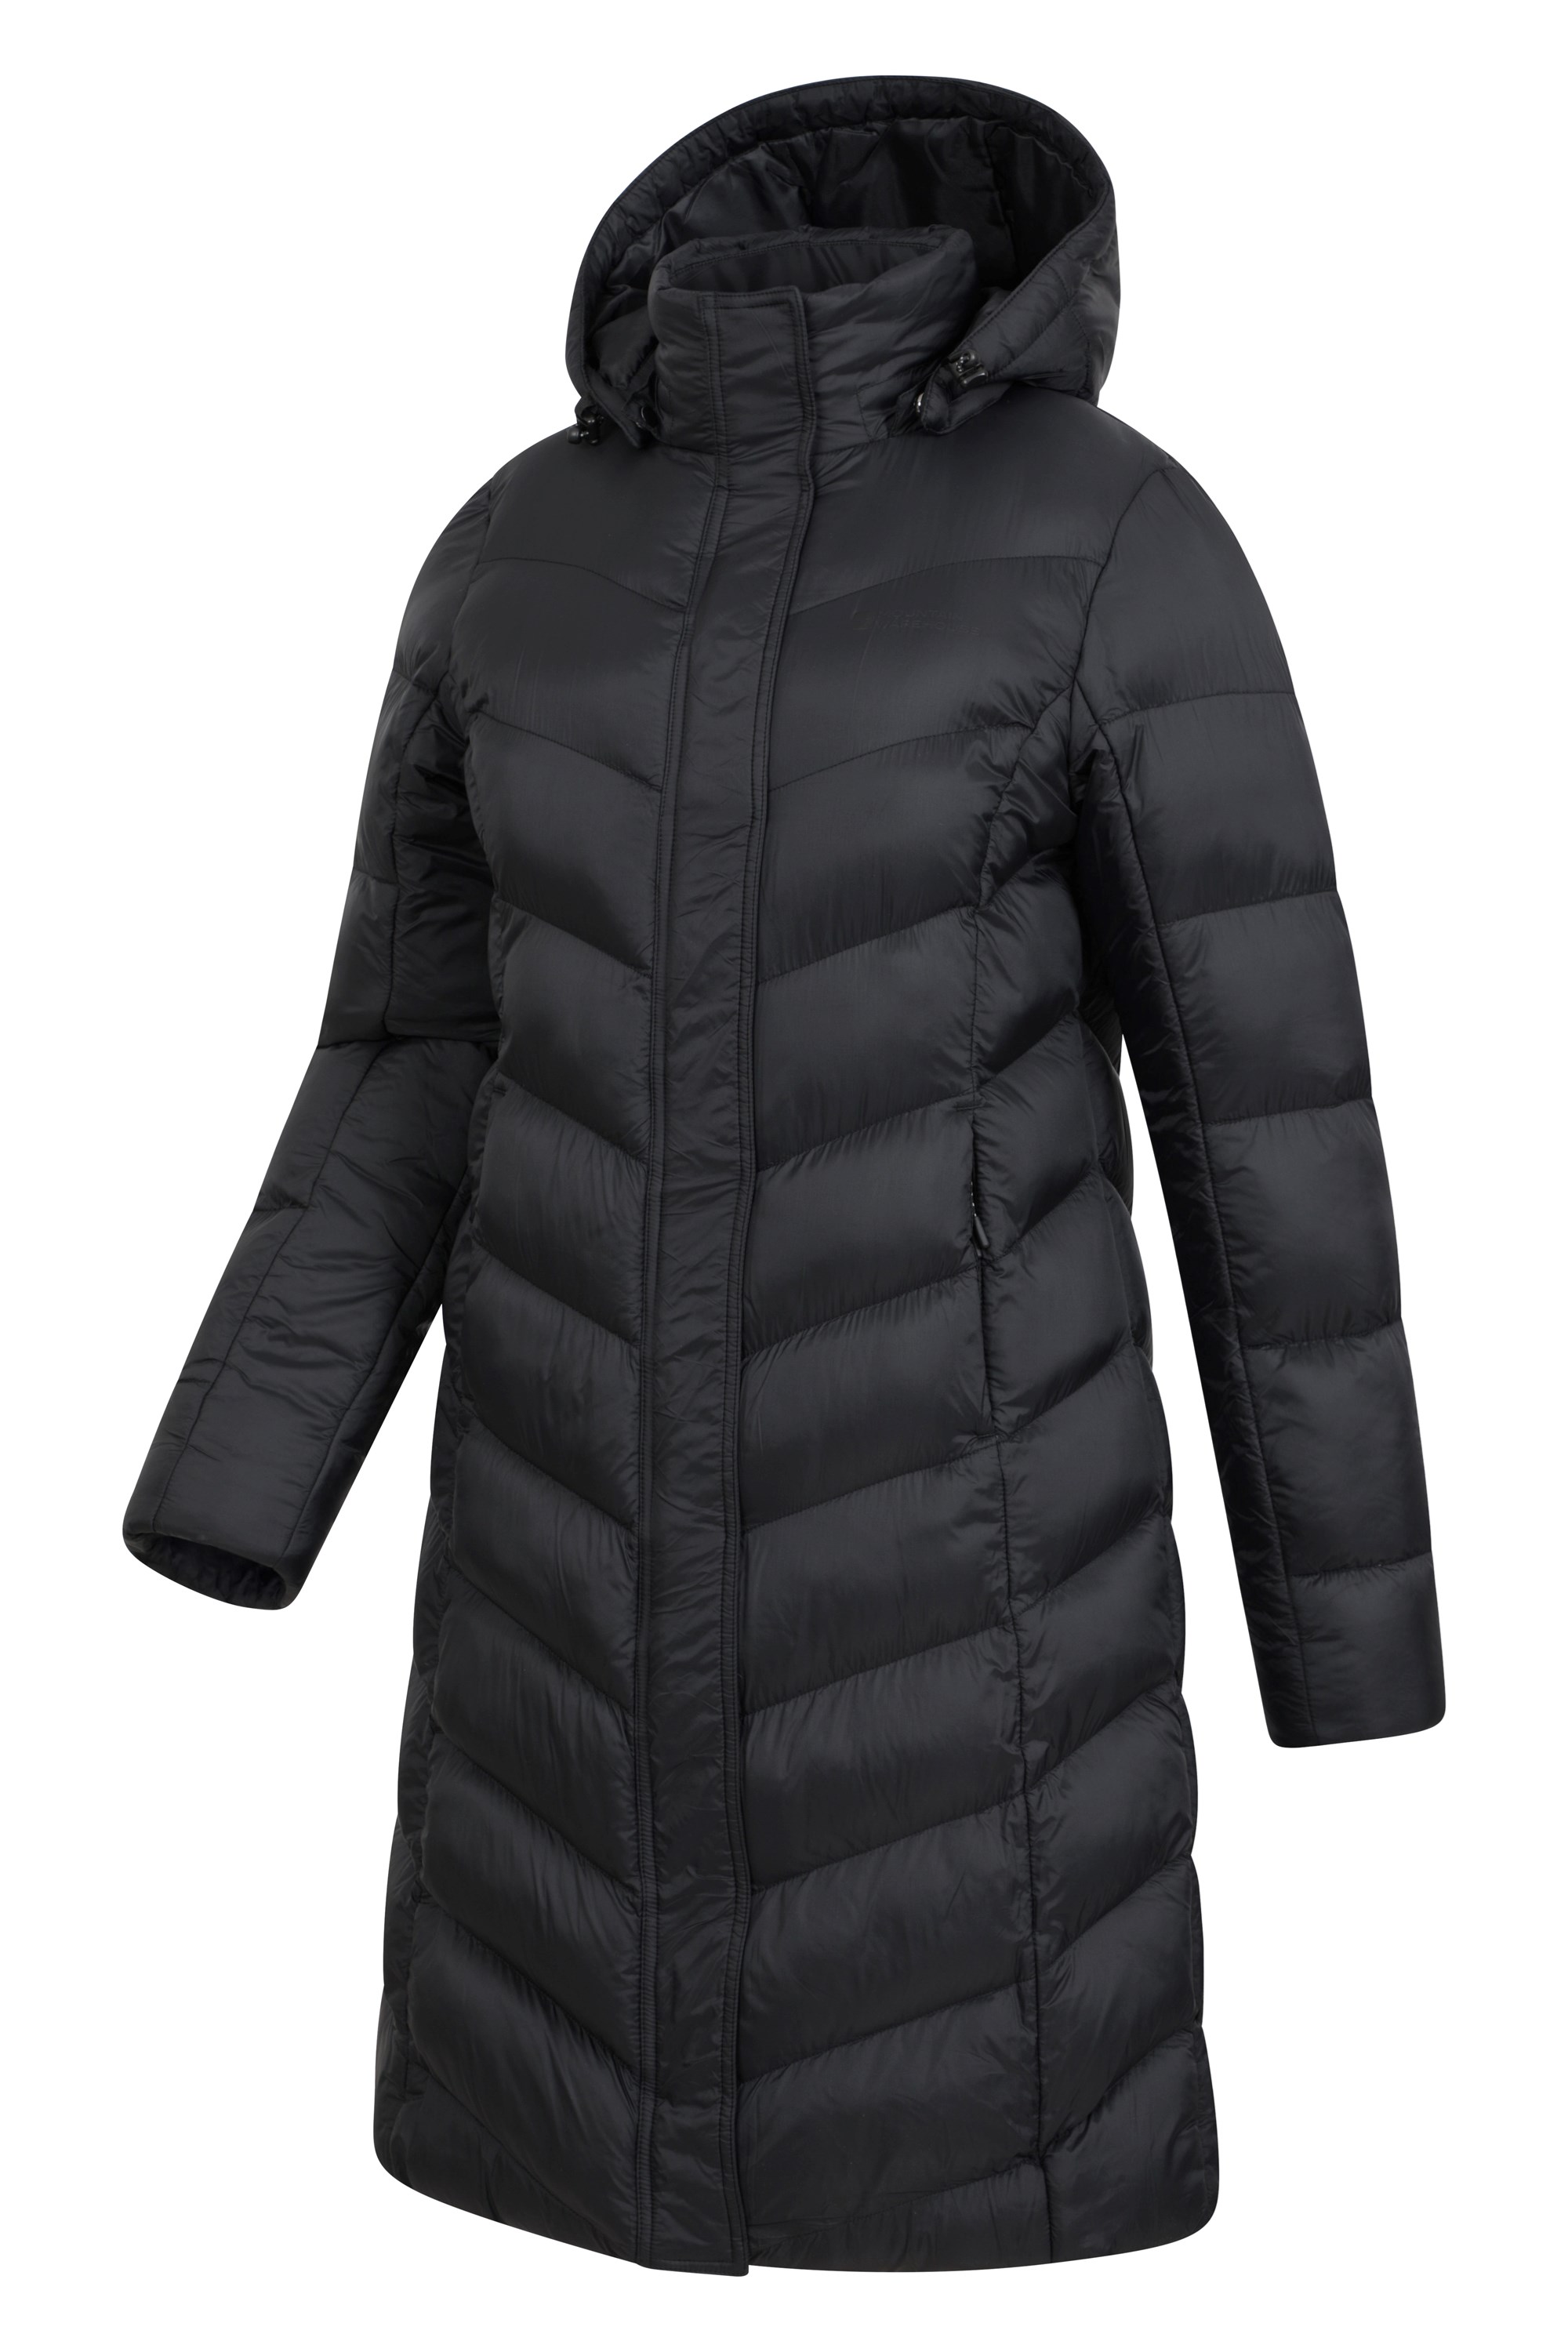 Florence Womens Long Insulated Jacket